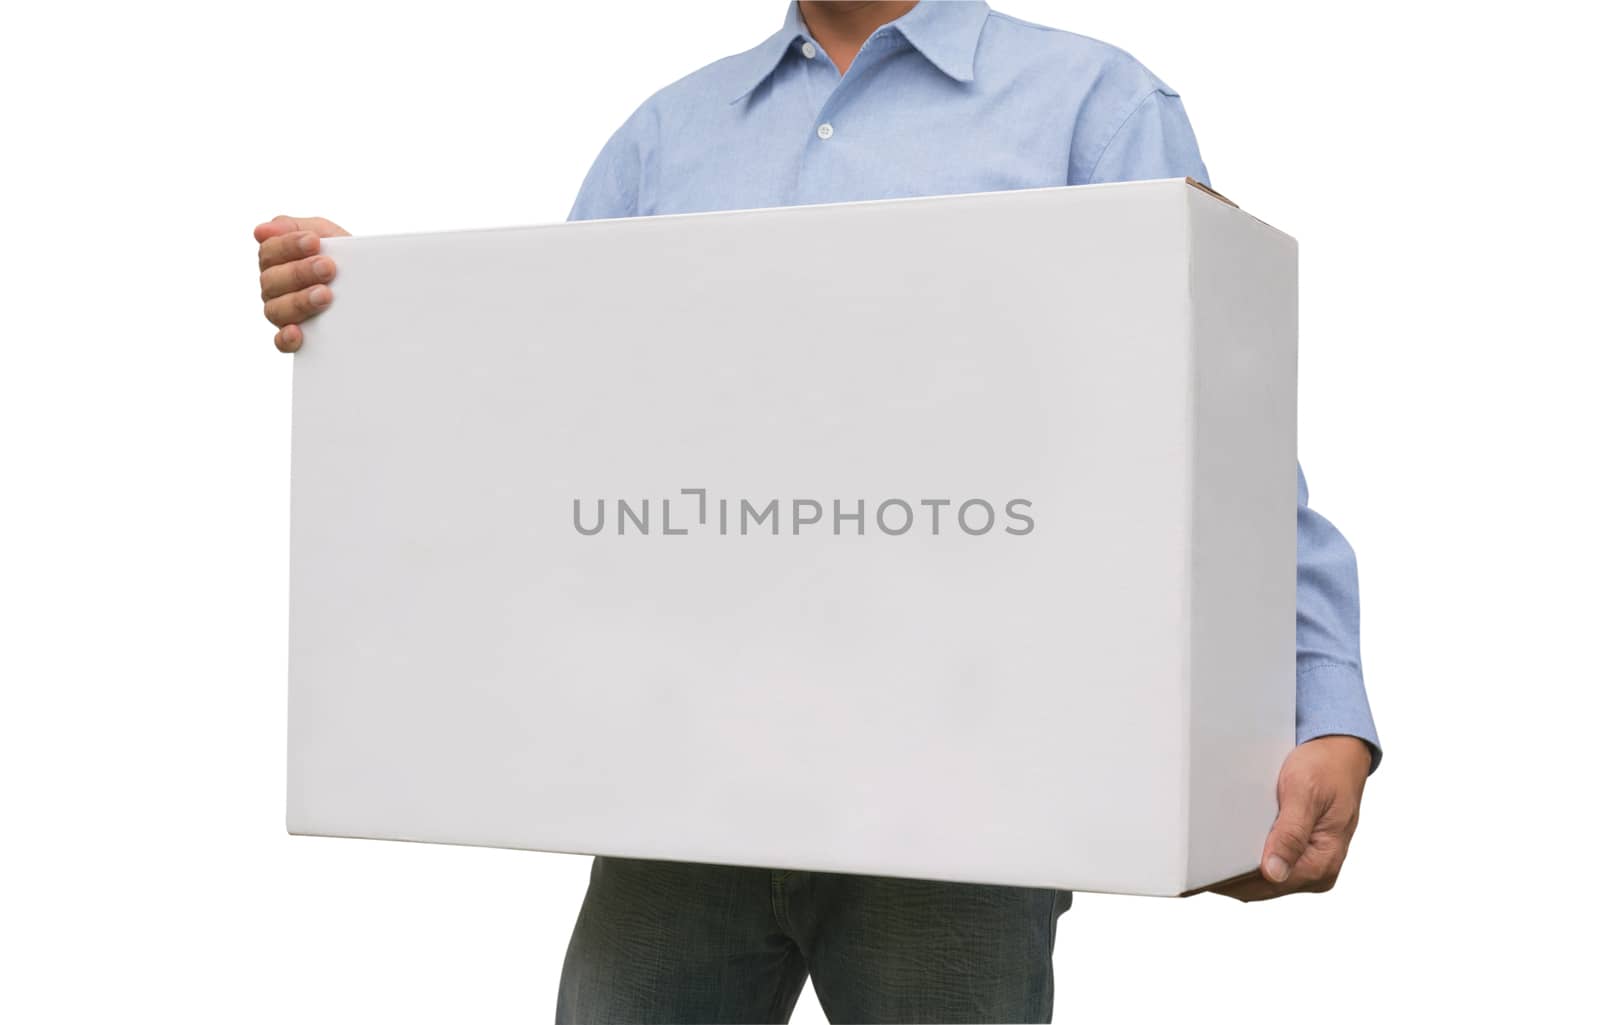 Business man carrying a white box isolated on white background